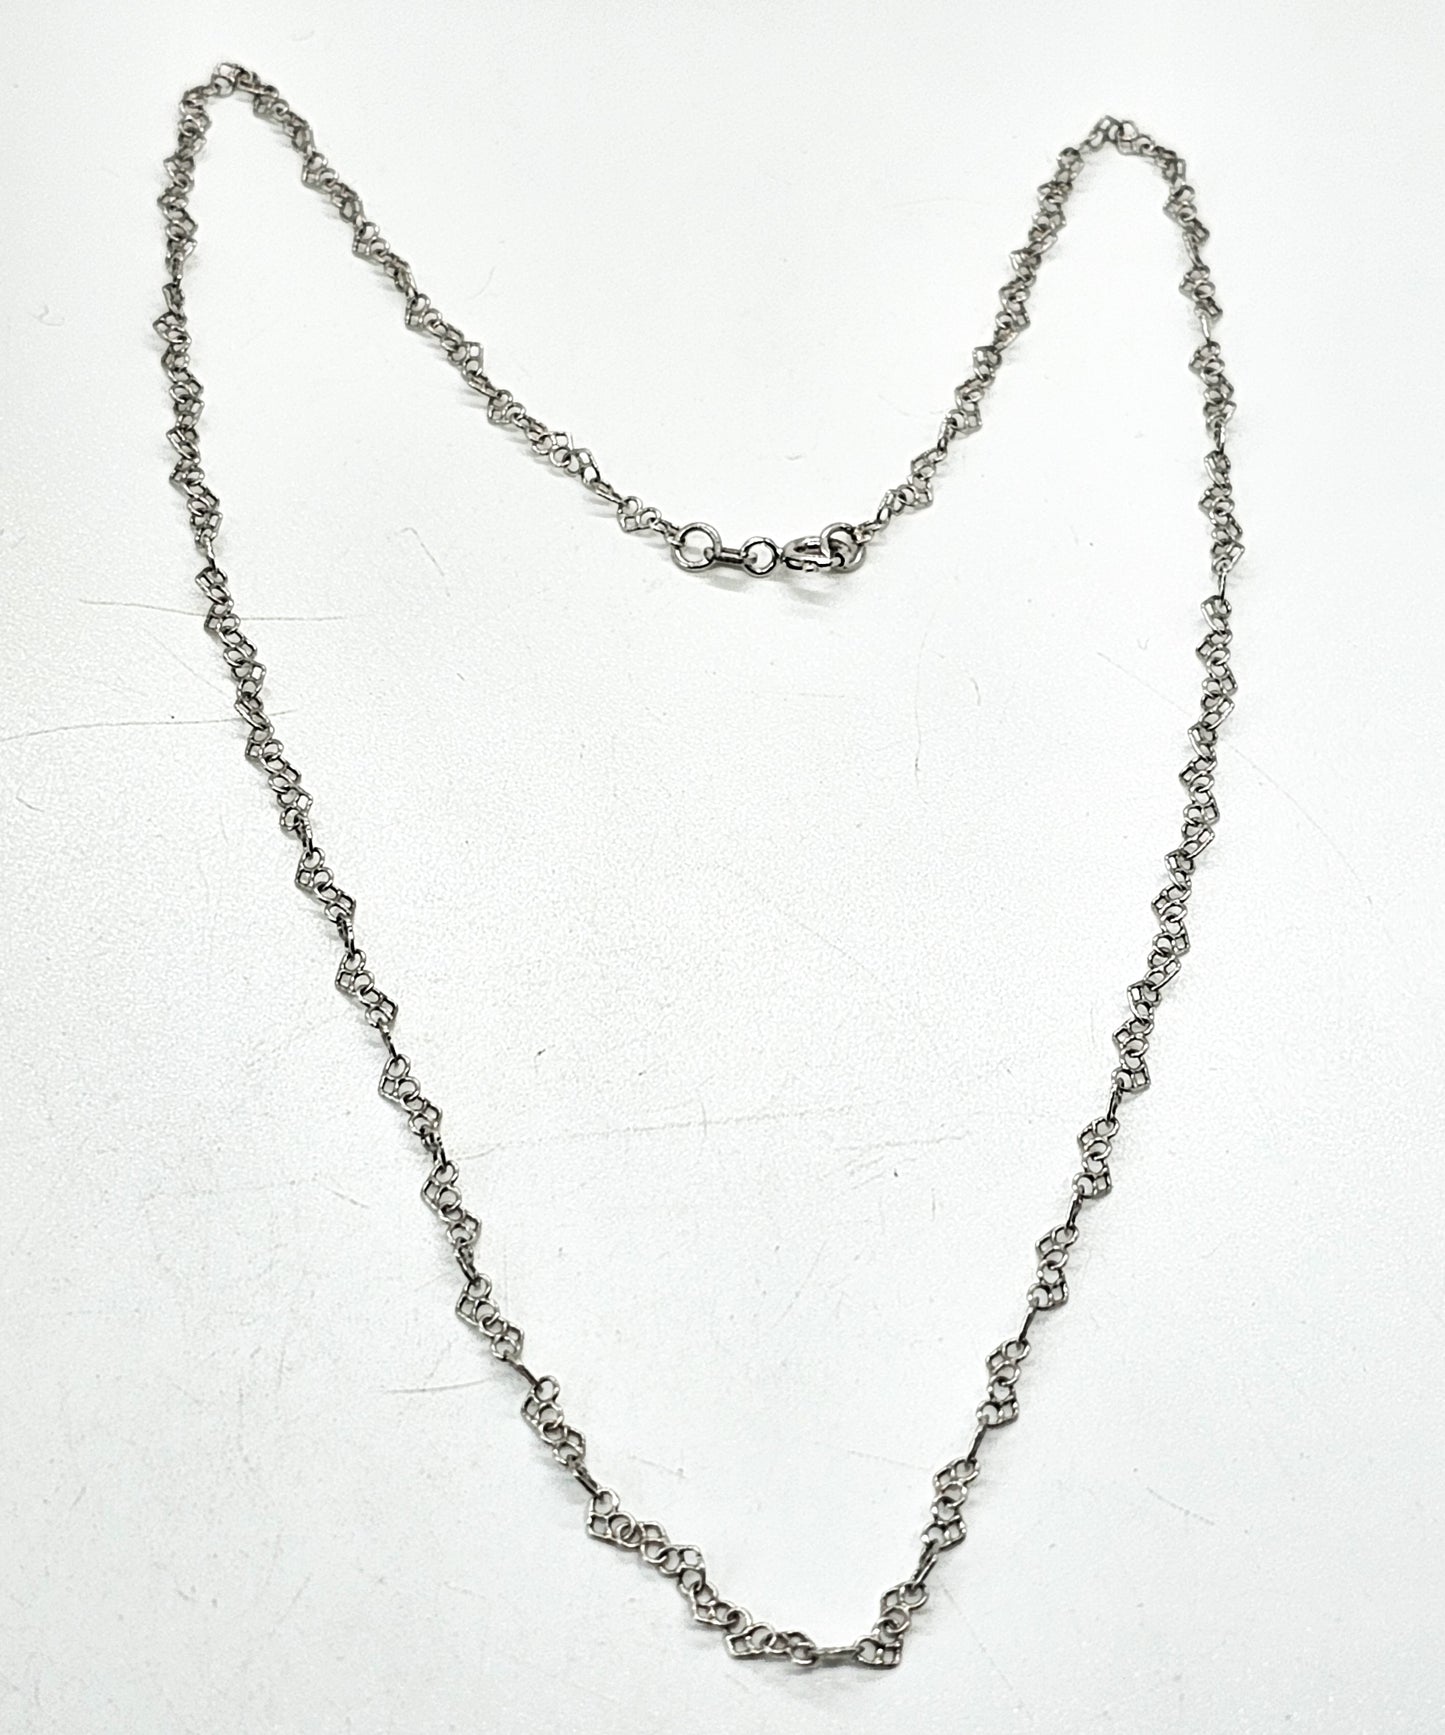 Heart link chain open work sterling silver 17 inch necklace